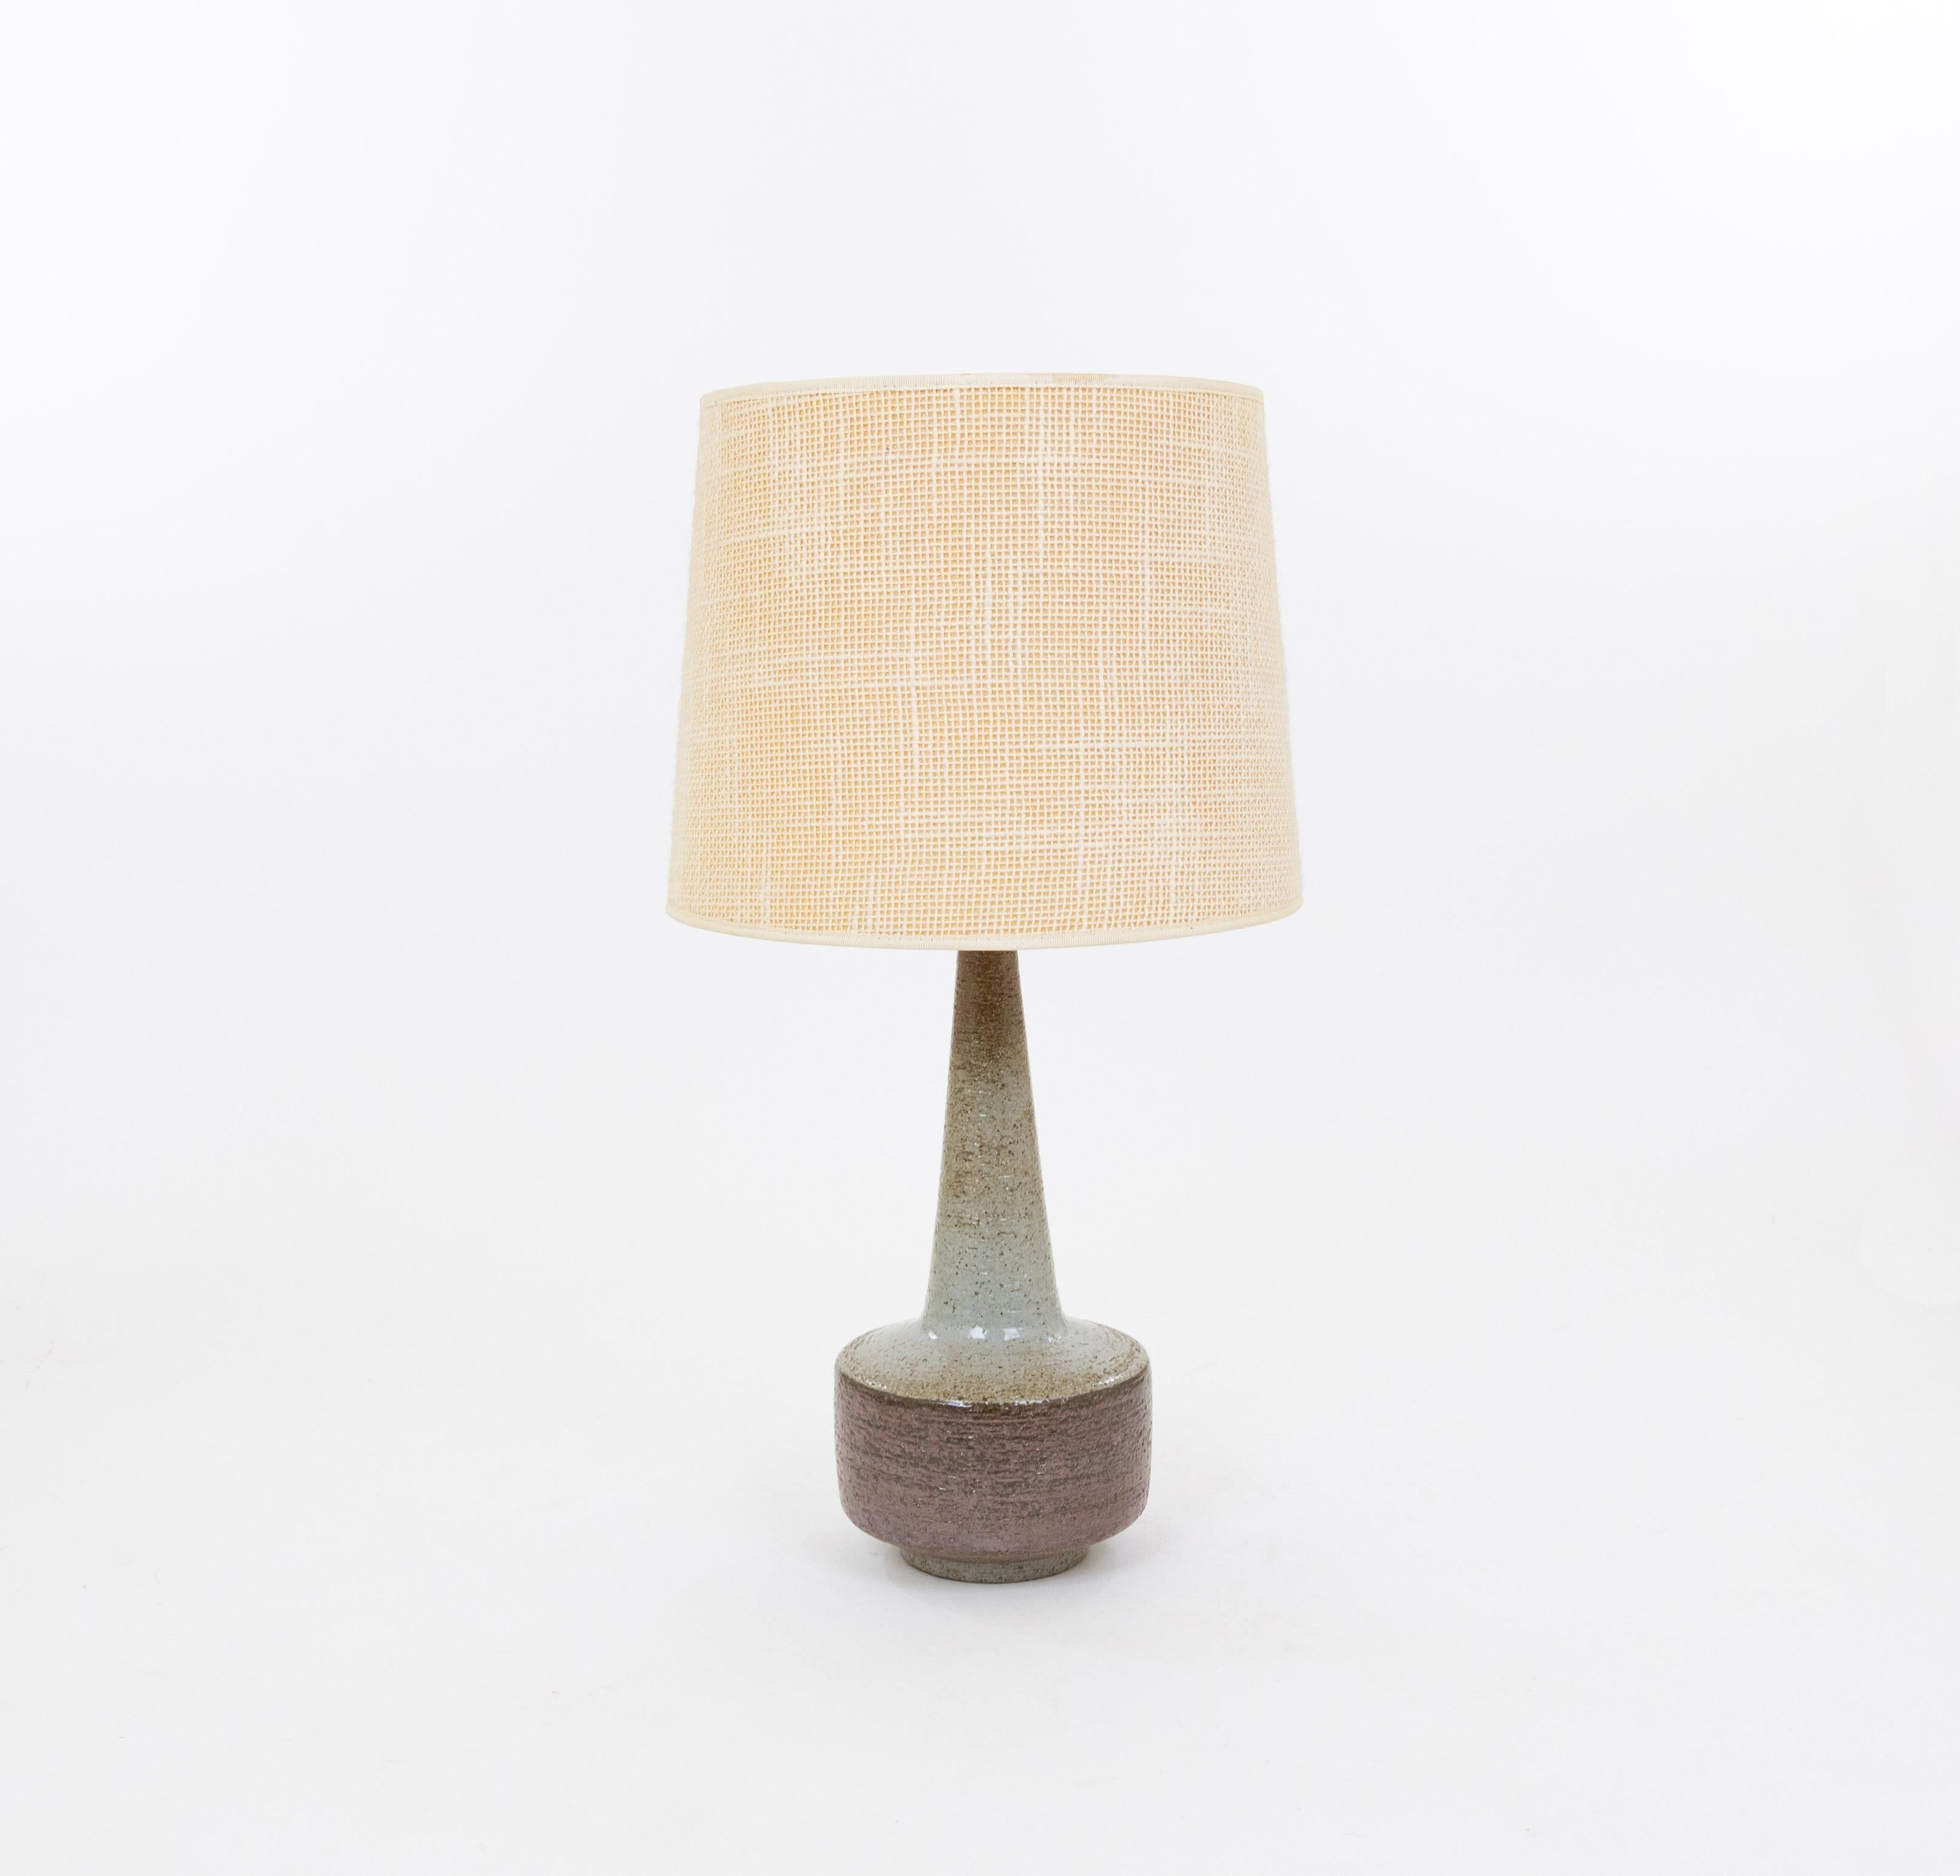 Model DL/46 table lamp made by Annelise and Per Linnemann-Schmidt for Palshus in the 1960s. The colour of the handmade decorated base is Brown and Grey. 

The lamp comes with its original lampshade holder. The lampshade and the small vase are for